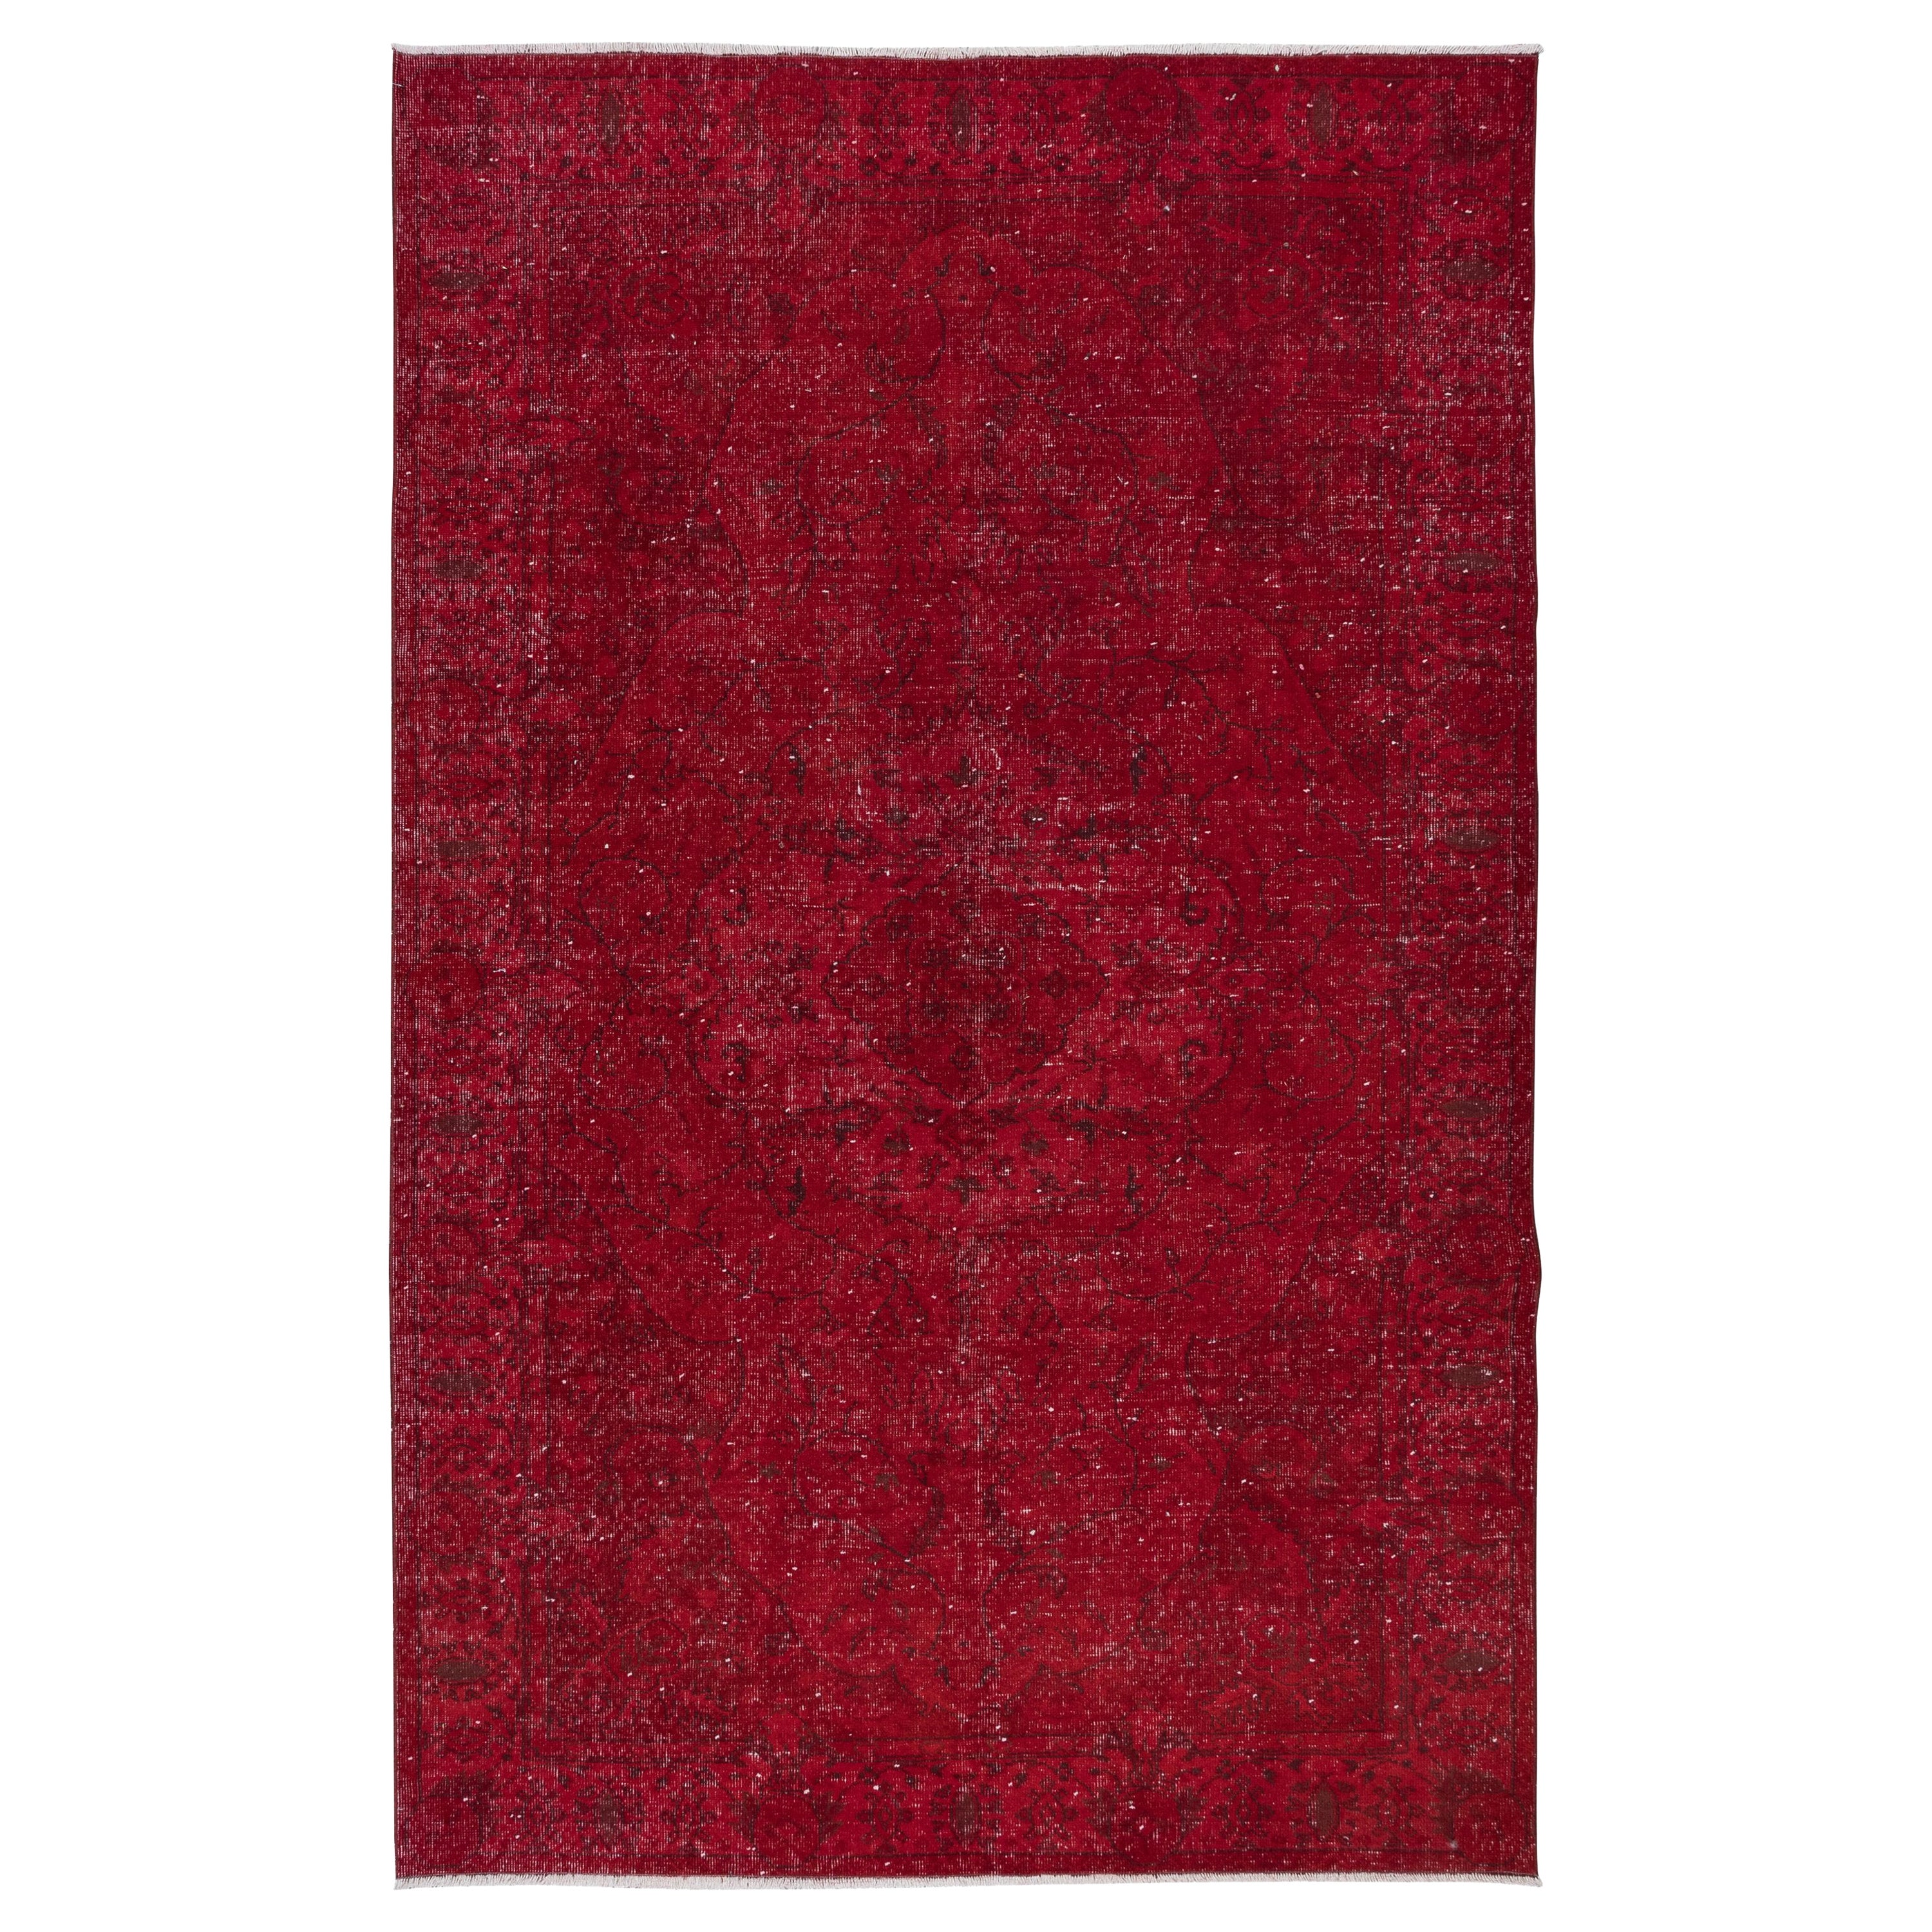 6x9.8 Ft One-of-a-Kind Red Wool Area Rug, Room Size Handmade Turkish Carpet For Sale